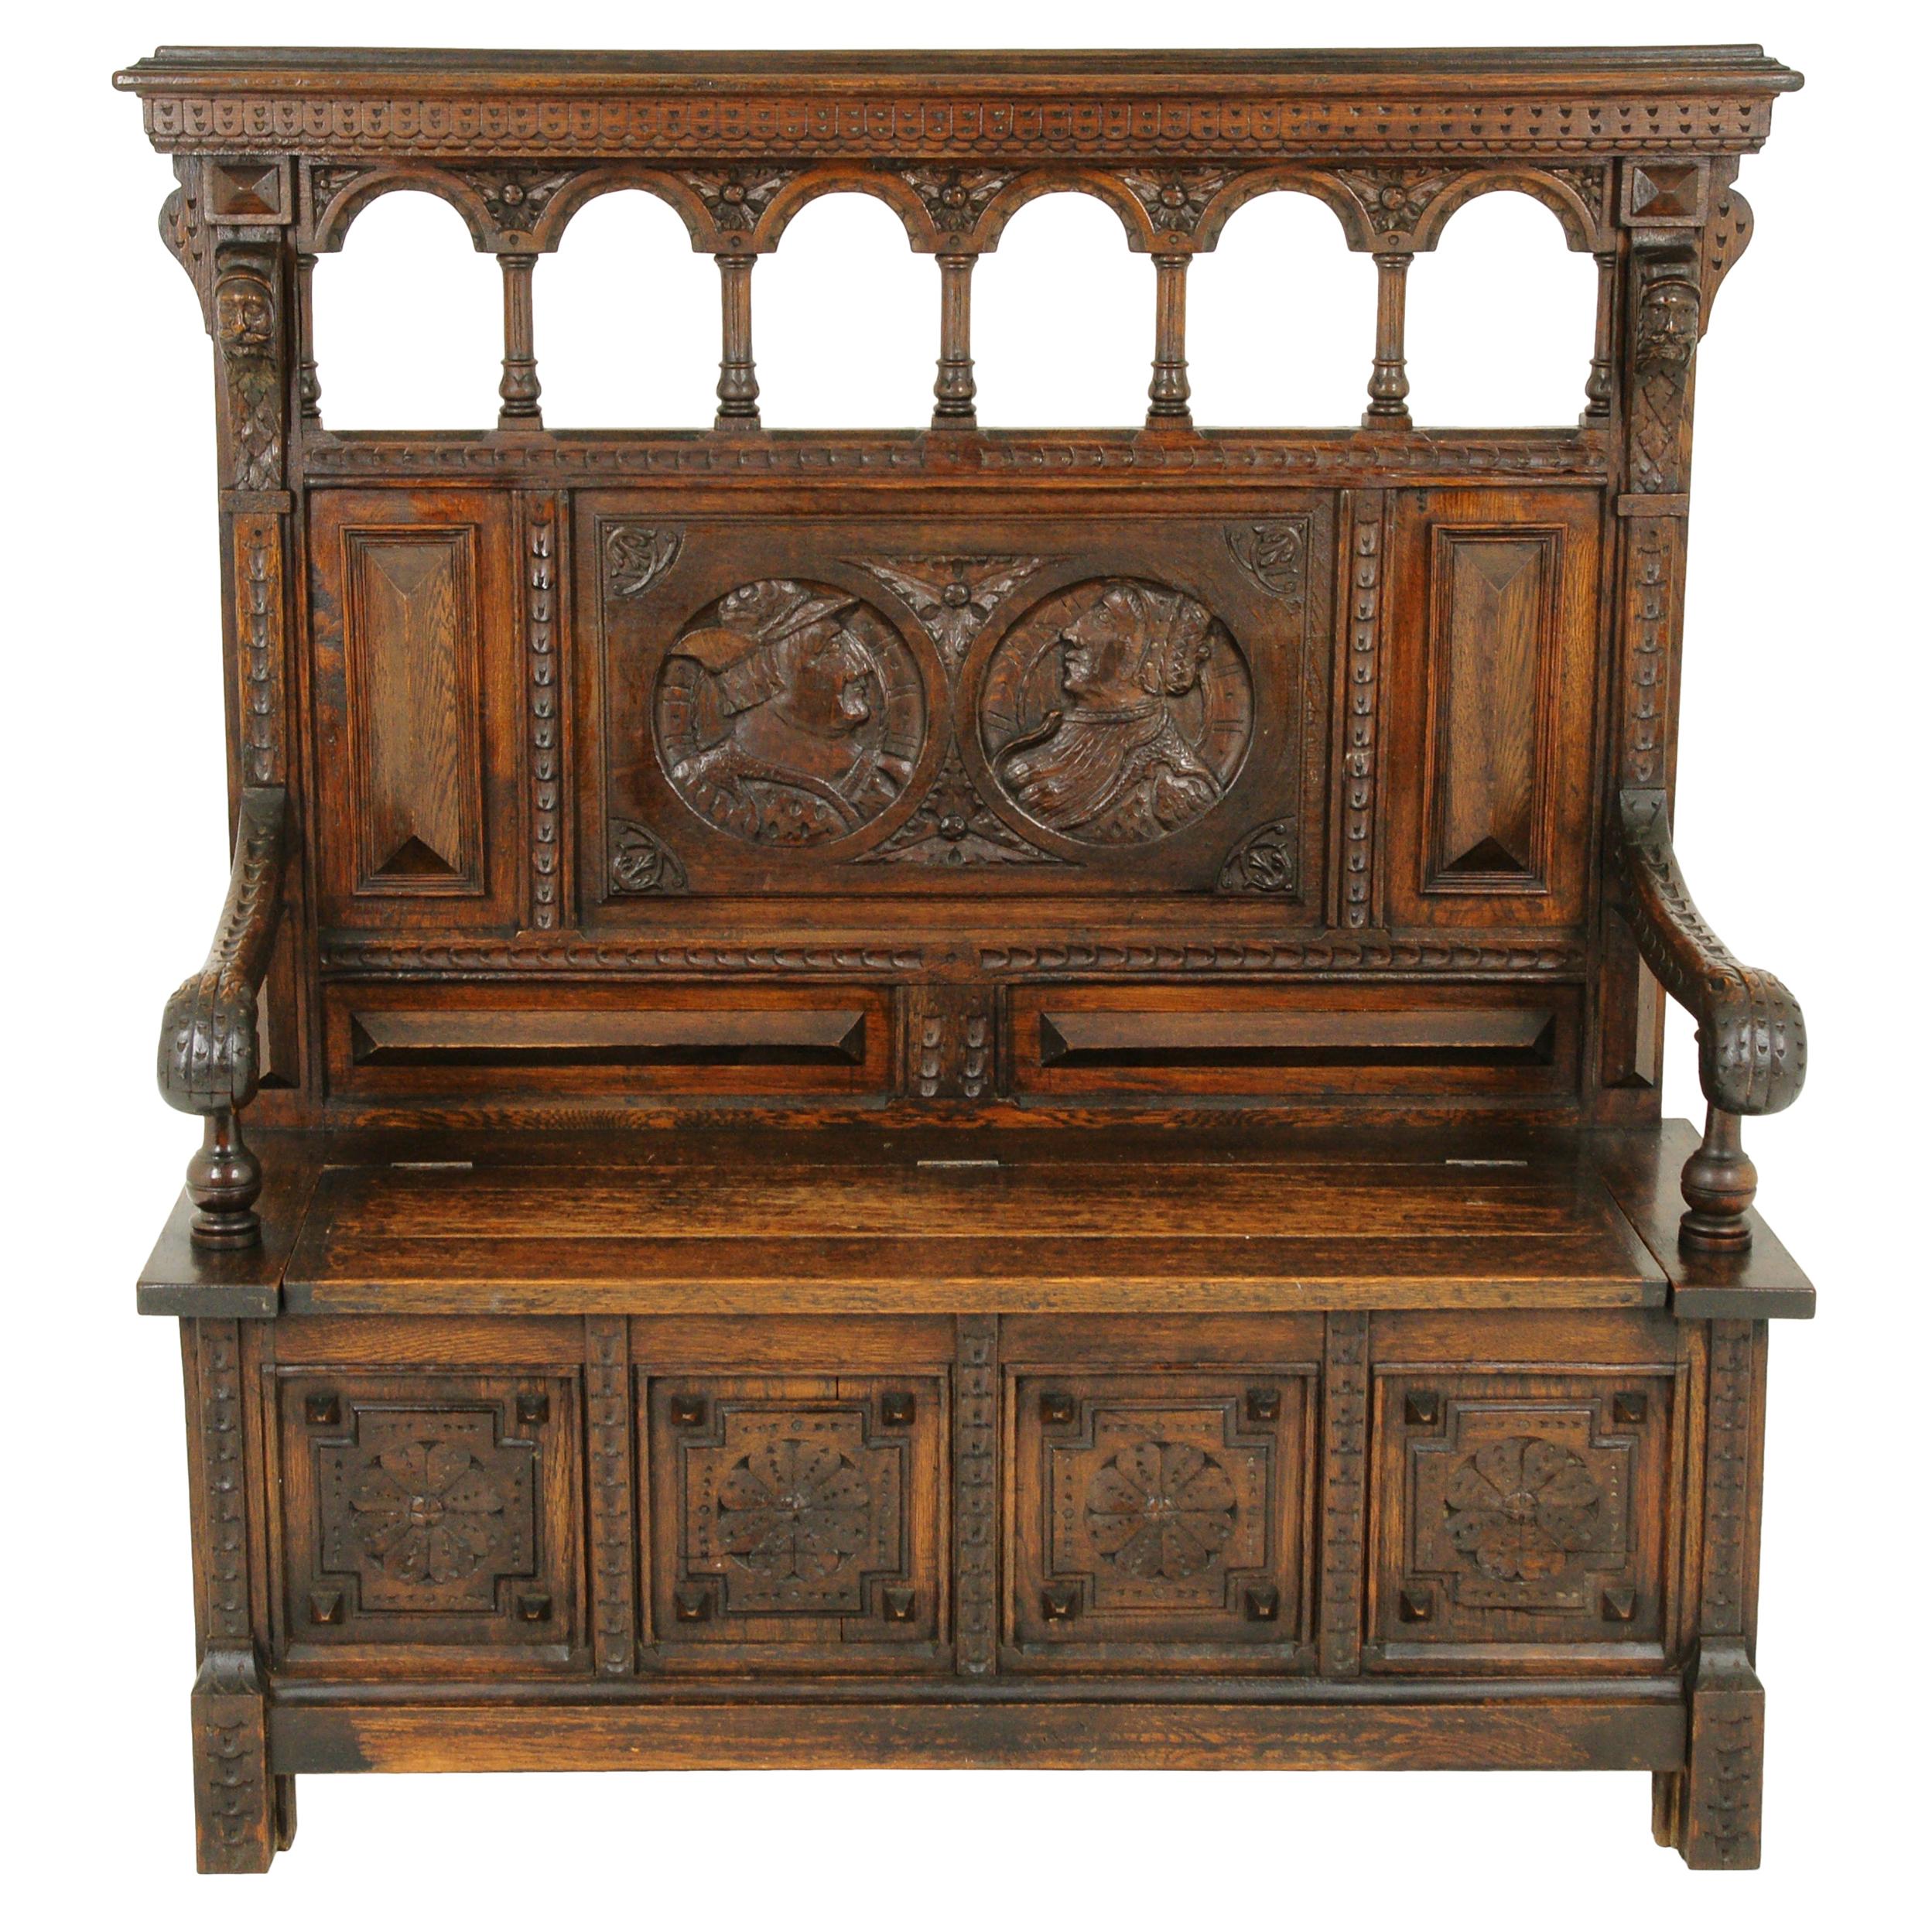 Antique Hall Bench, Monks Bench, Settle, Hall Bench, Scotland 1870, B1742